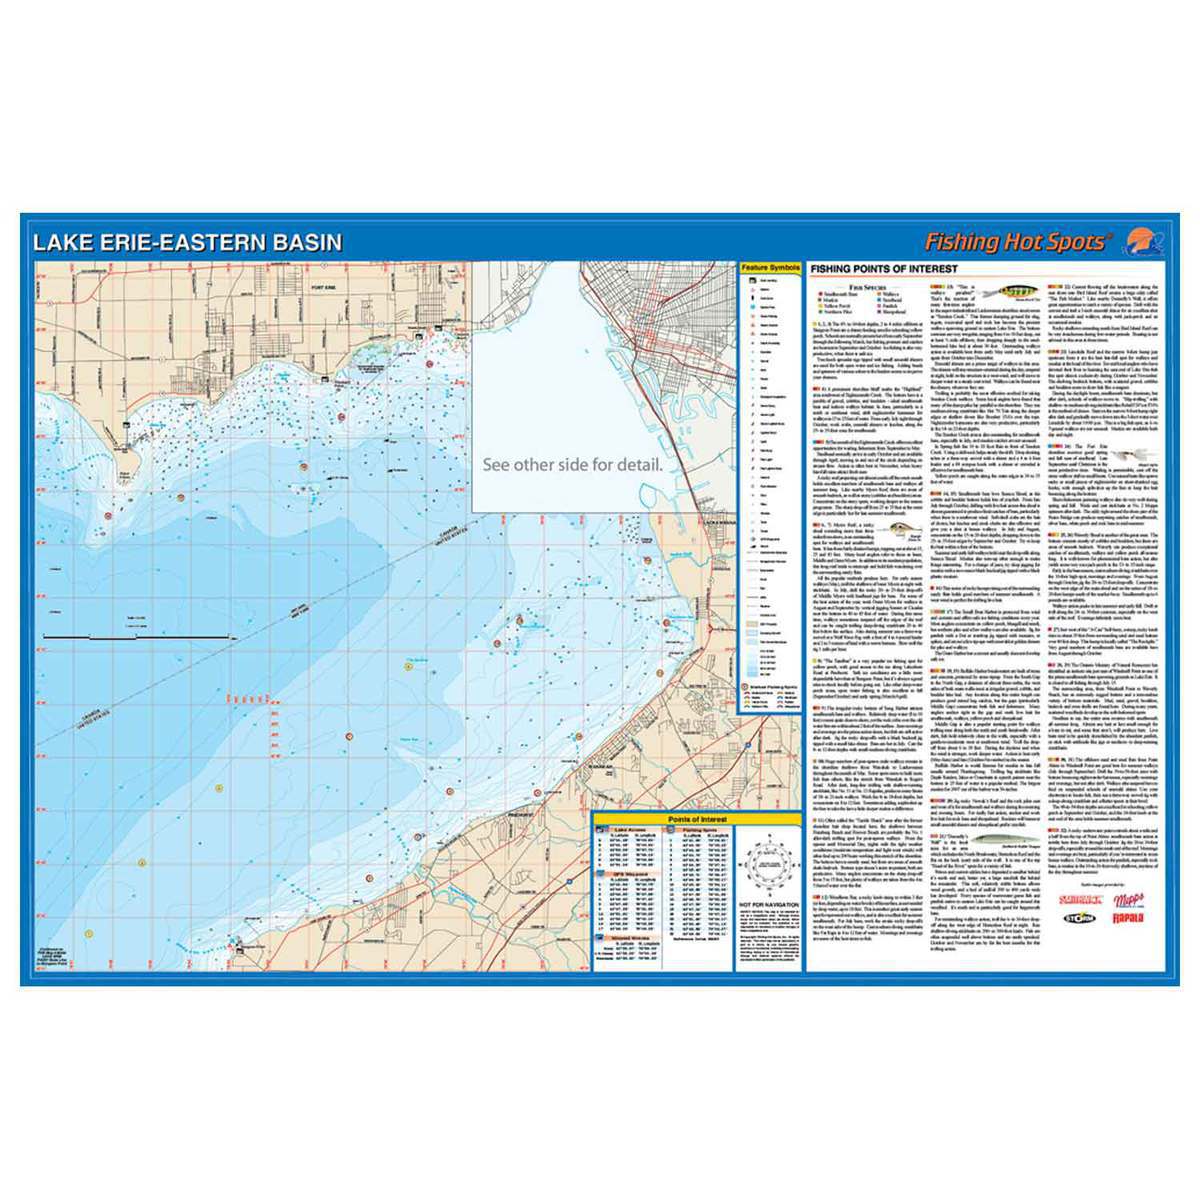 Lake Erie Central Basin- East Detailed Fishing Map, GPS Points